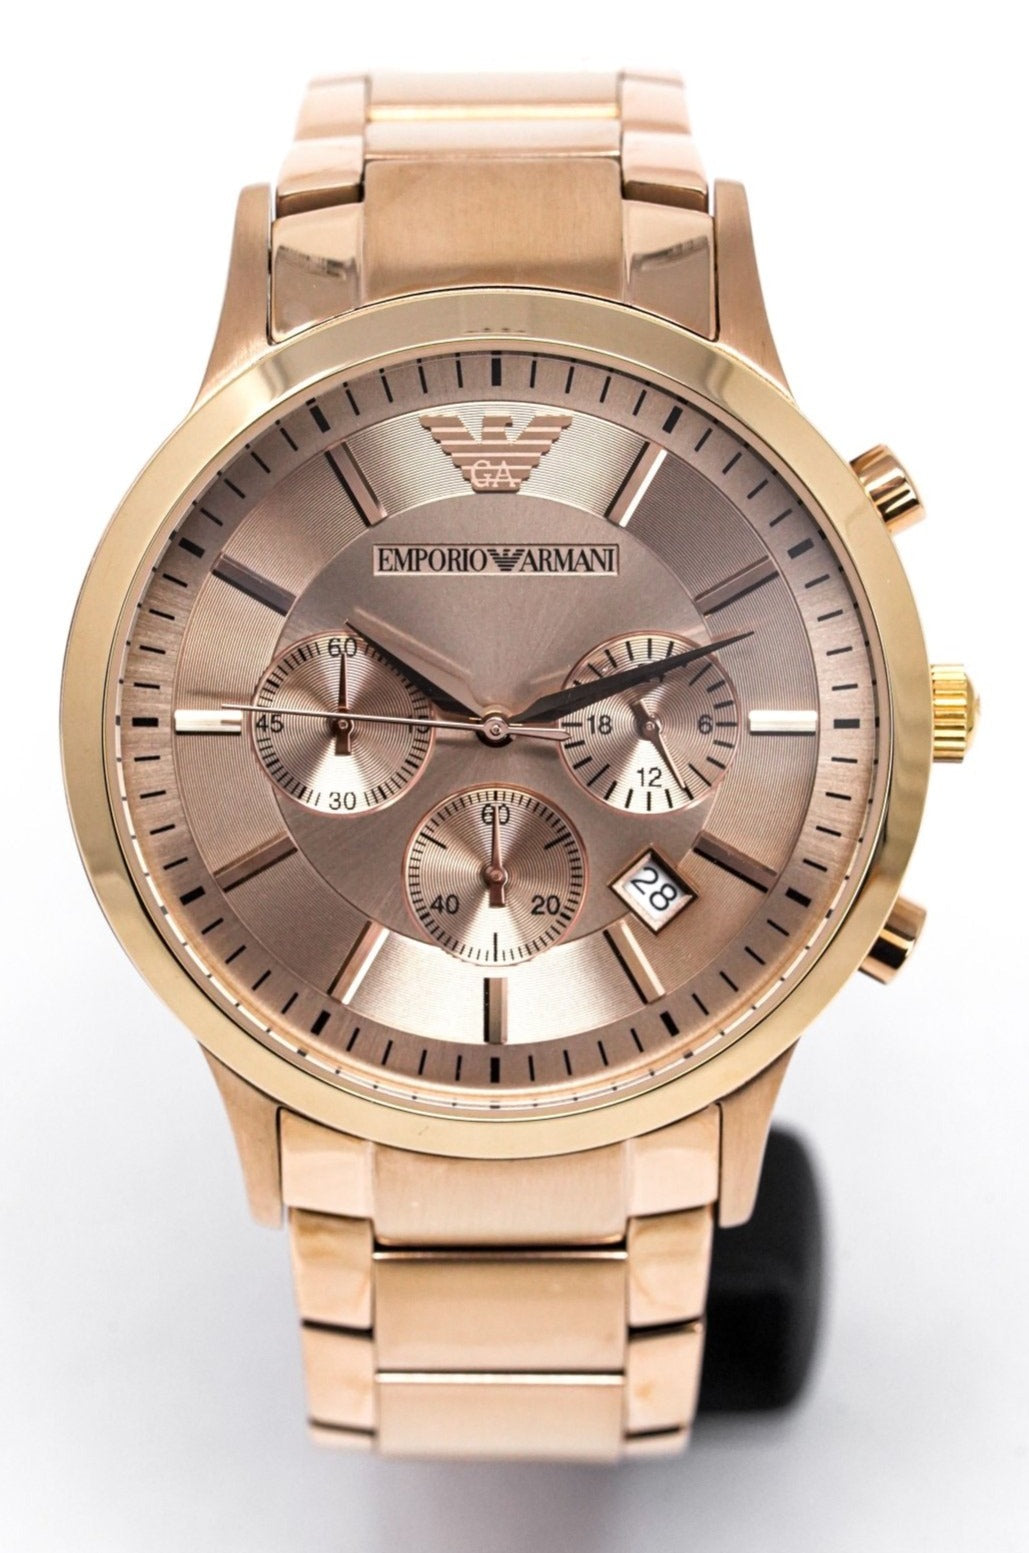 Emporio Armani Men's Chronograph Watch Rose Gold PVD AR2452 - Watches & Crystals